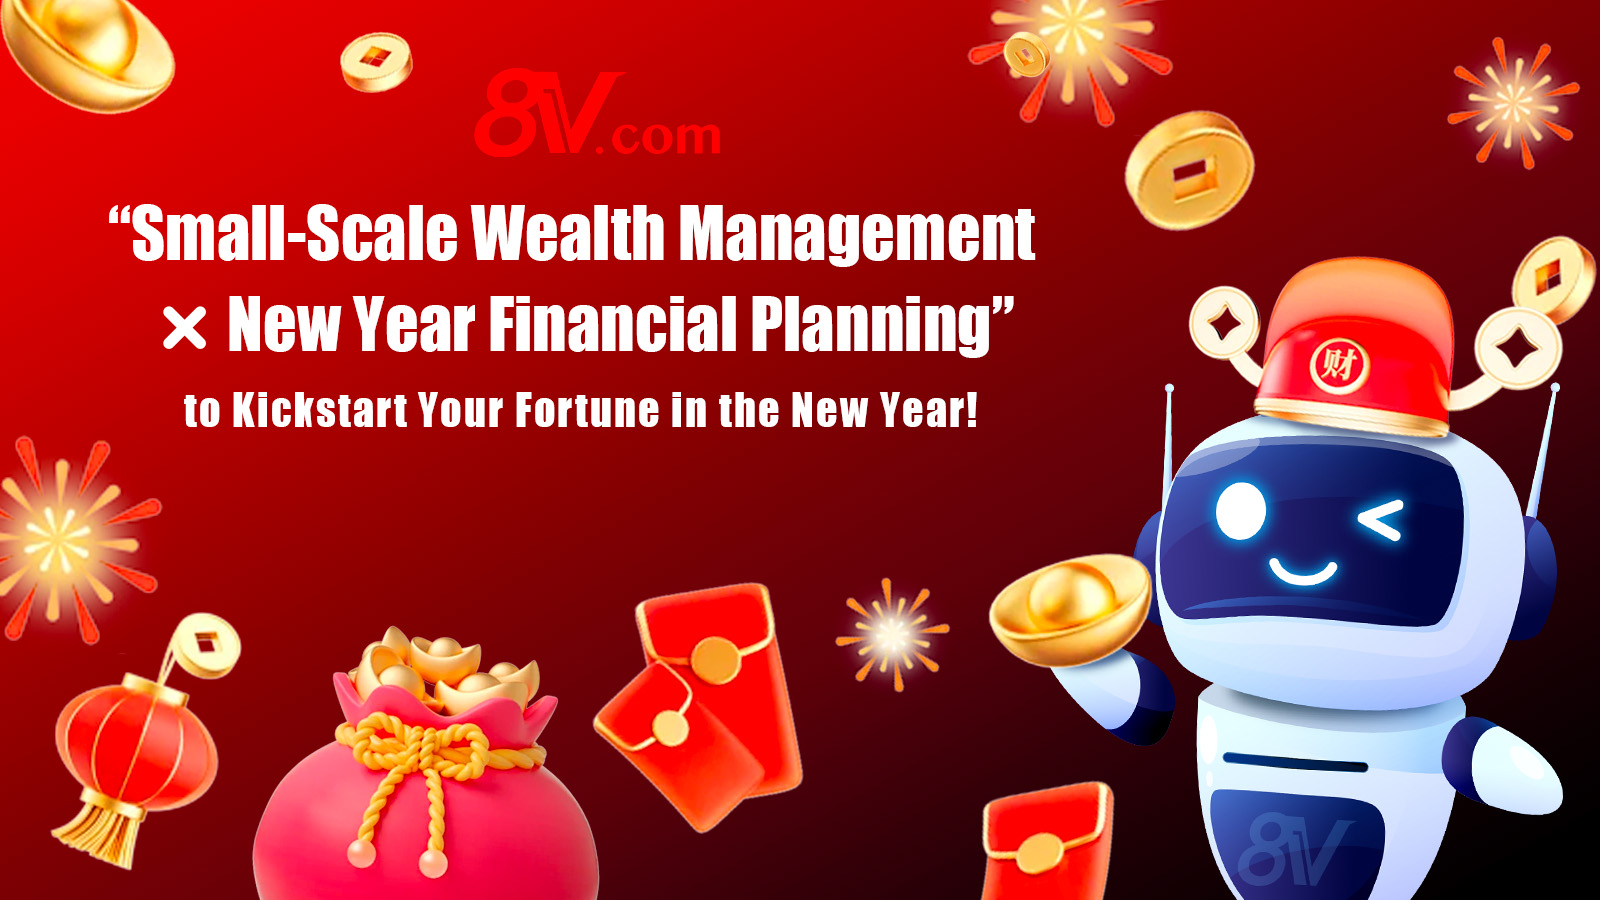 "Small-Scale Wealth Management x New Year Financial Planning" to Kickstart Your Fortune in the New Year!